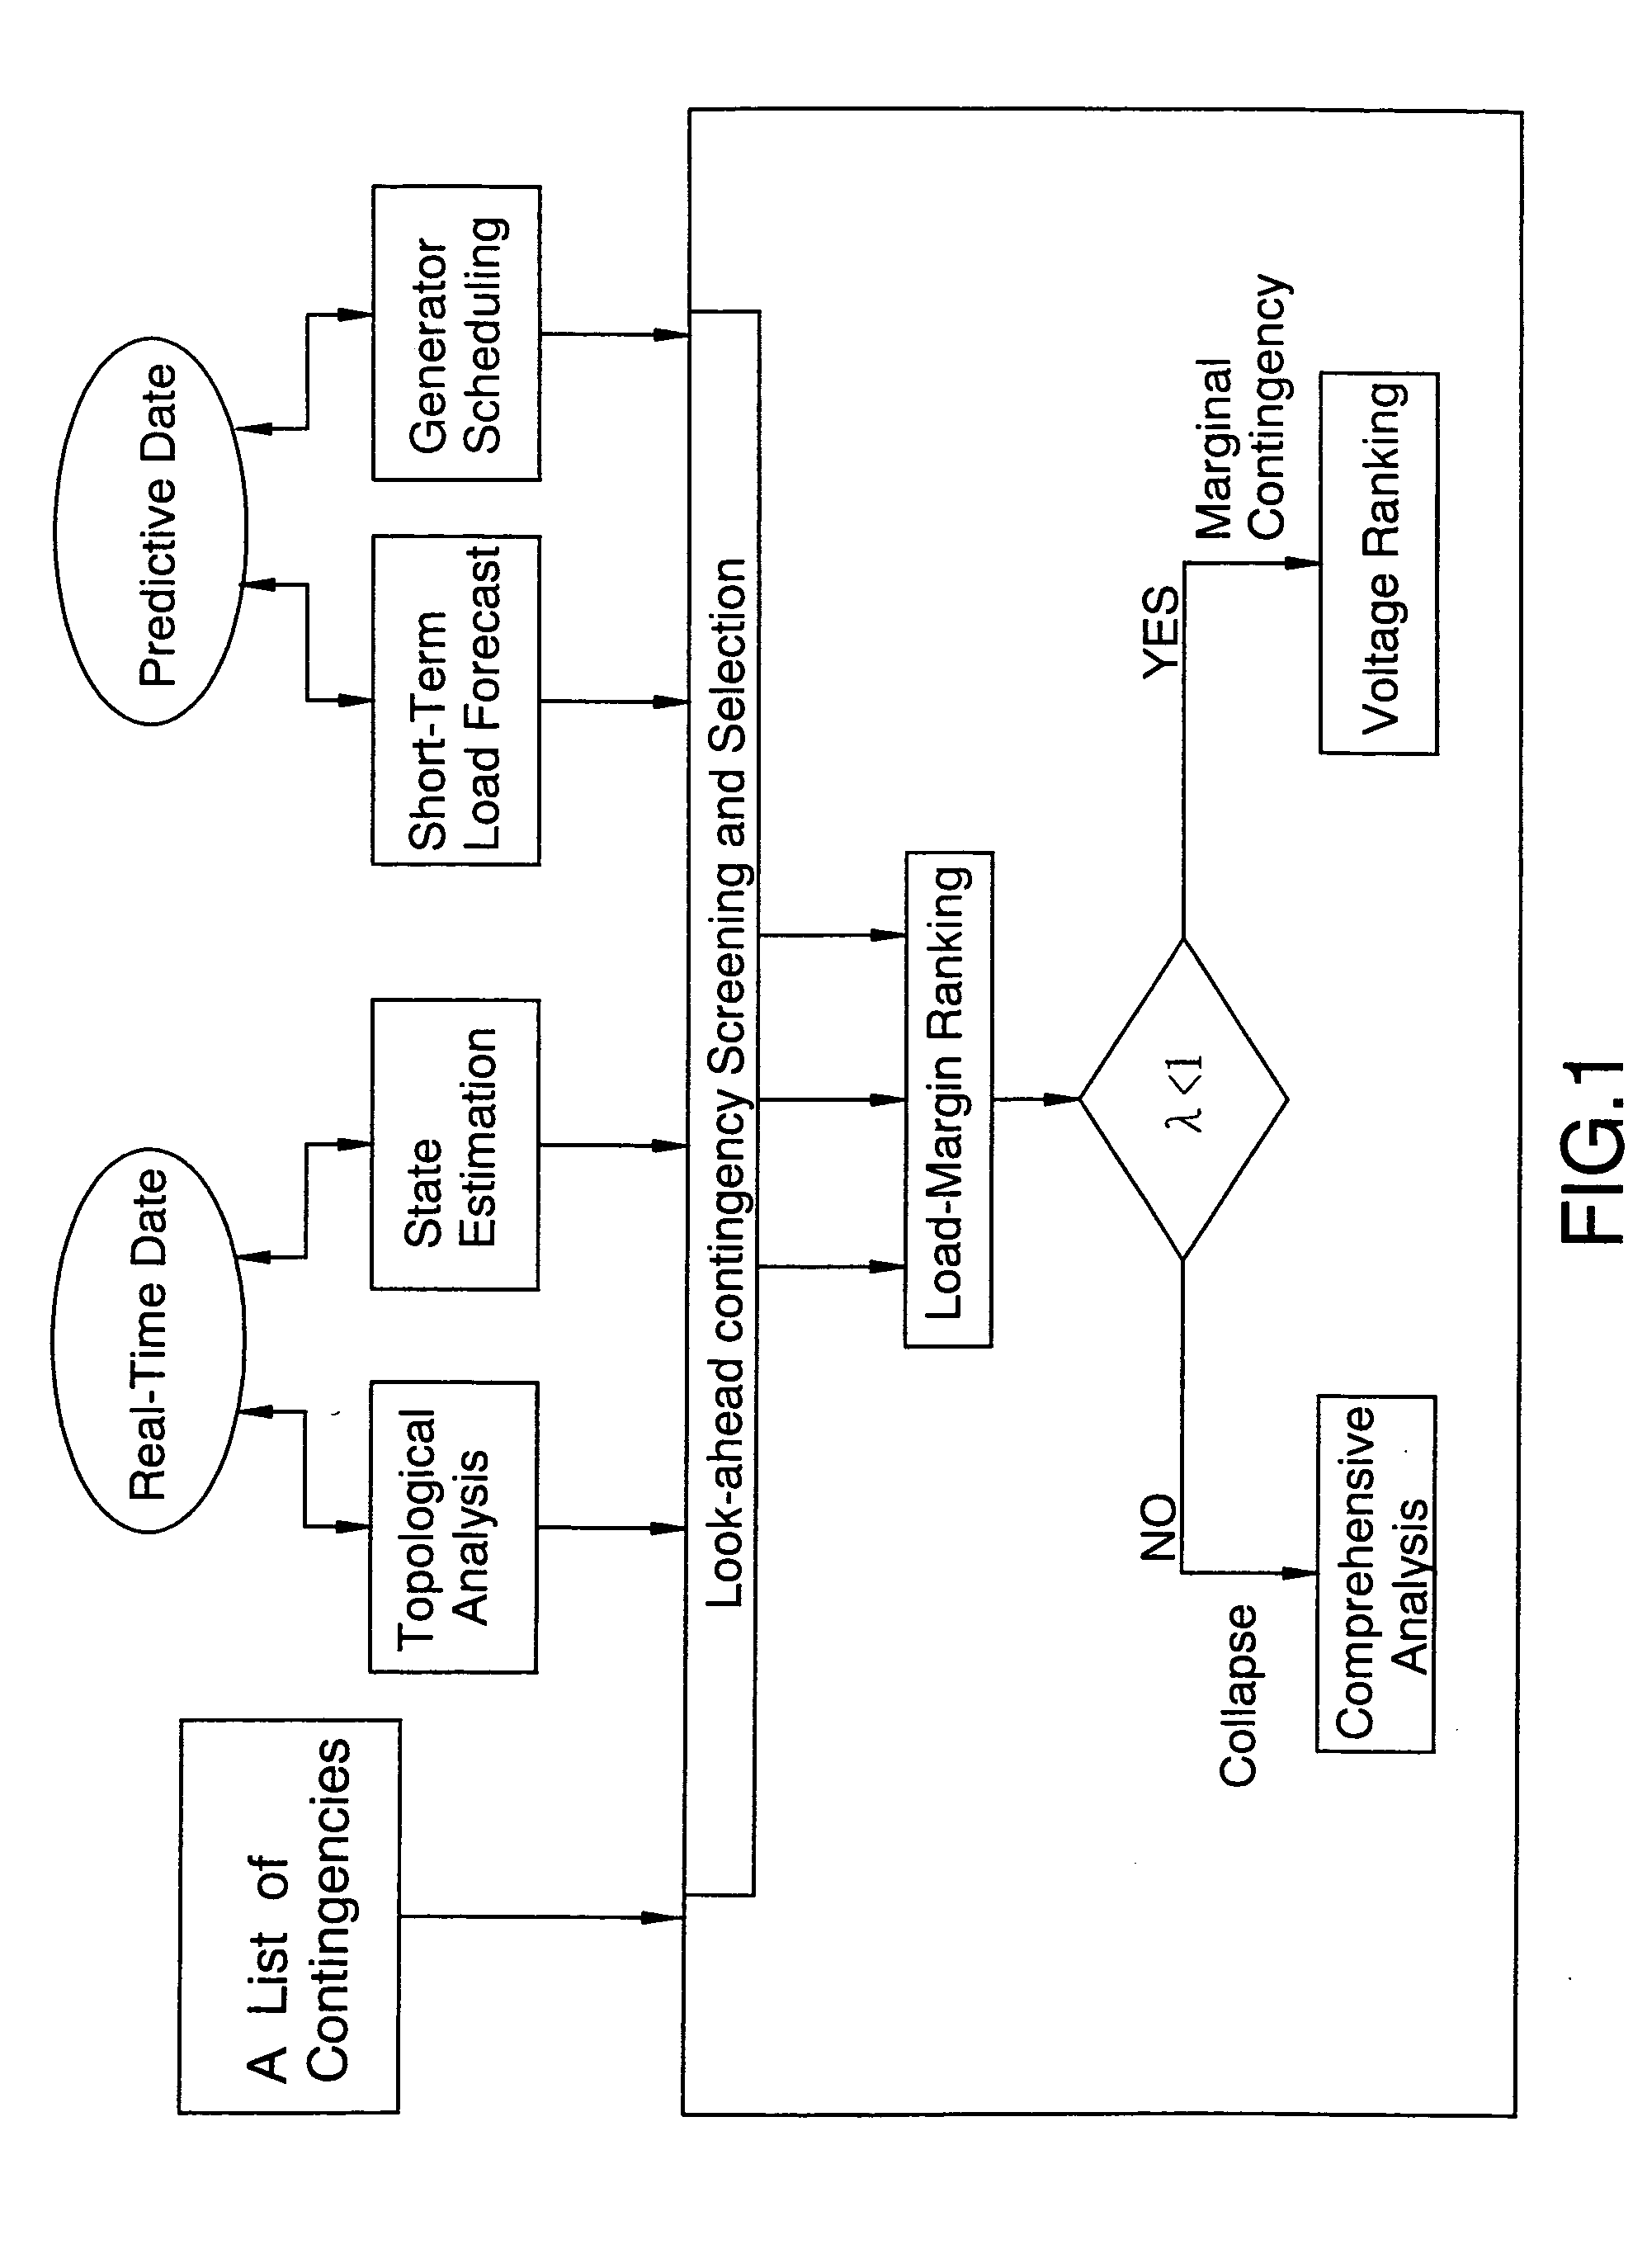 Efficient look-ahead load margin and voltage profiles contingency analysis using a tangent vector index method